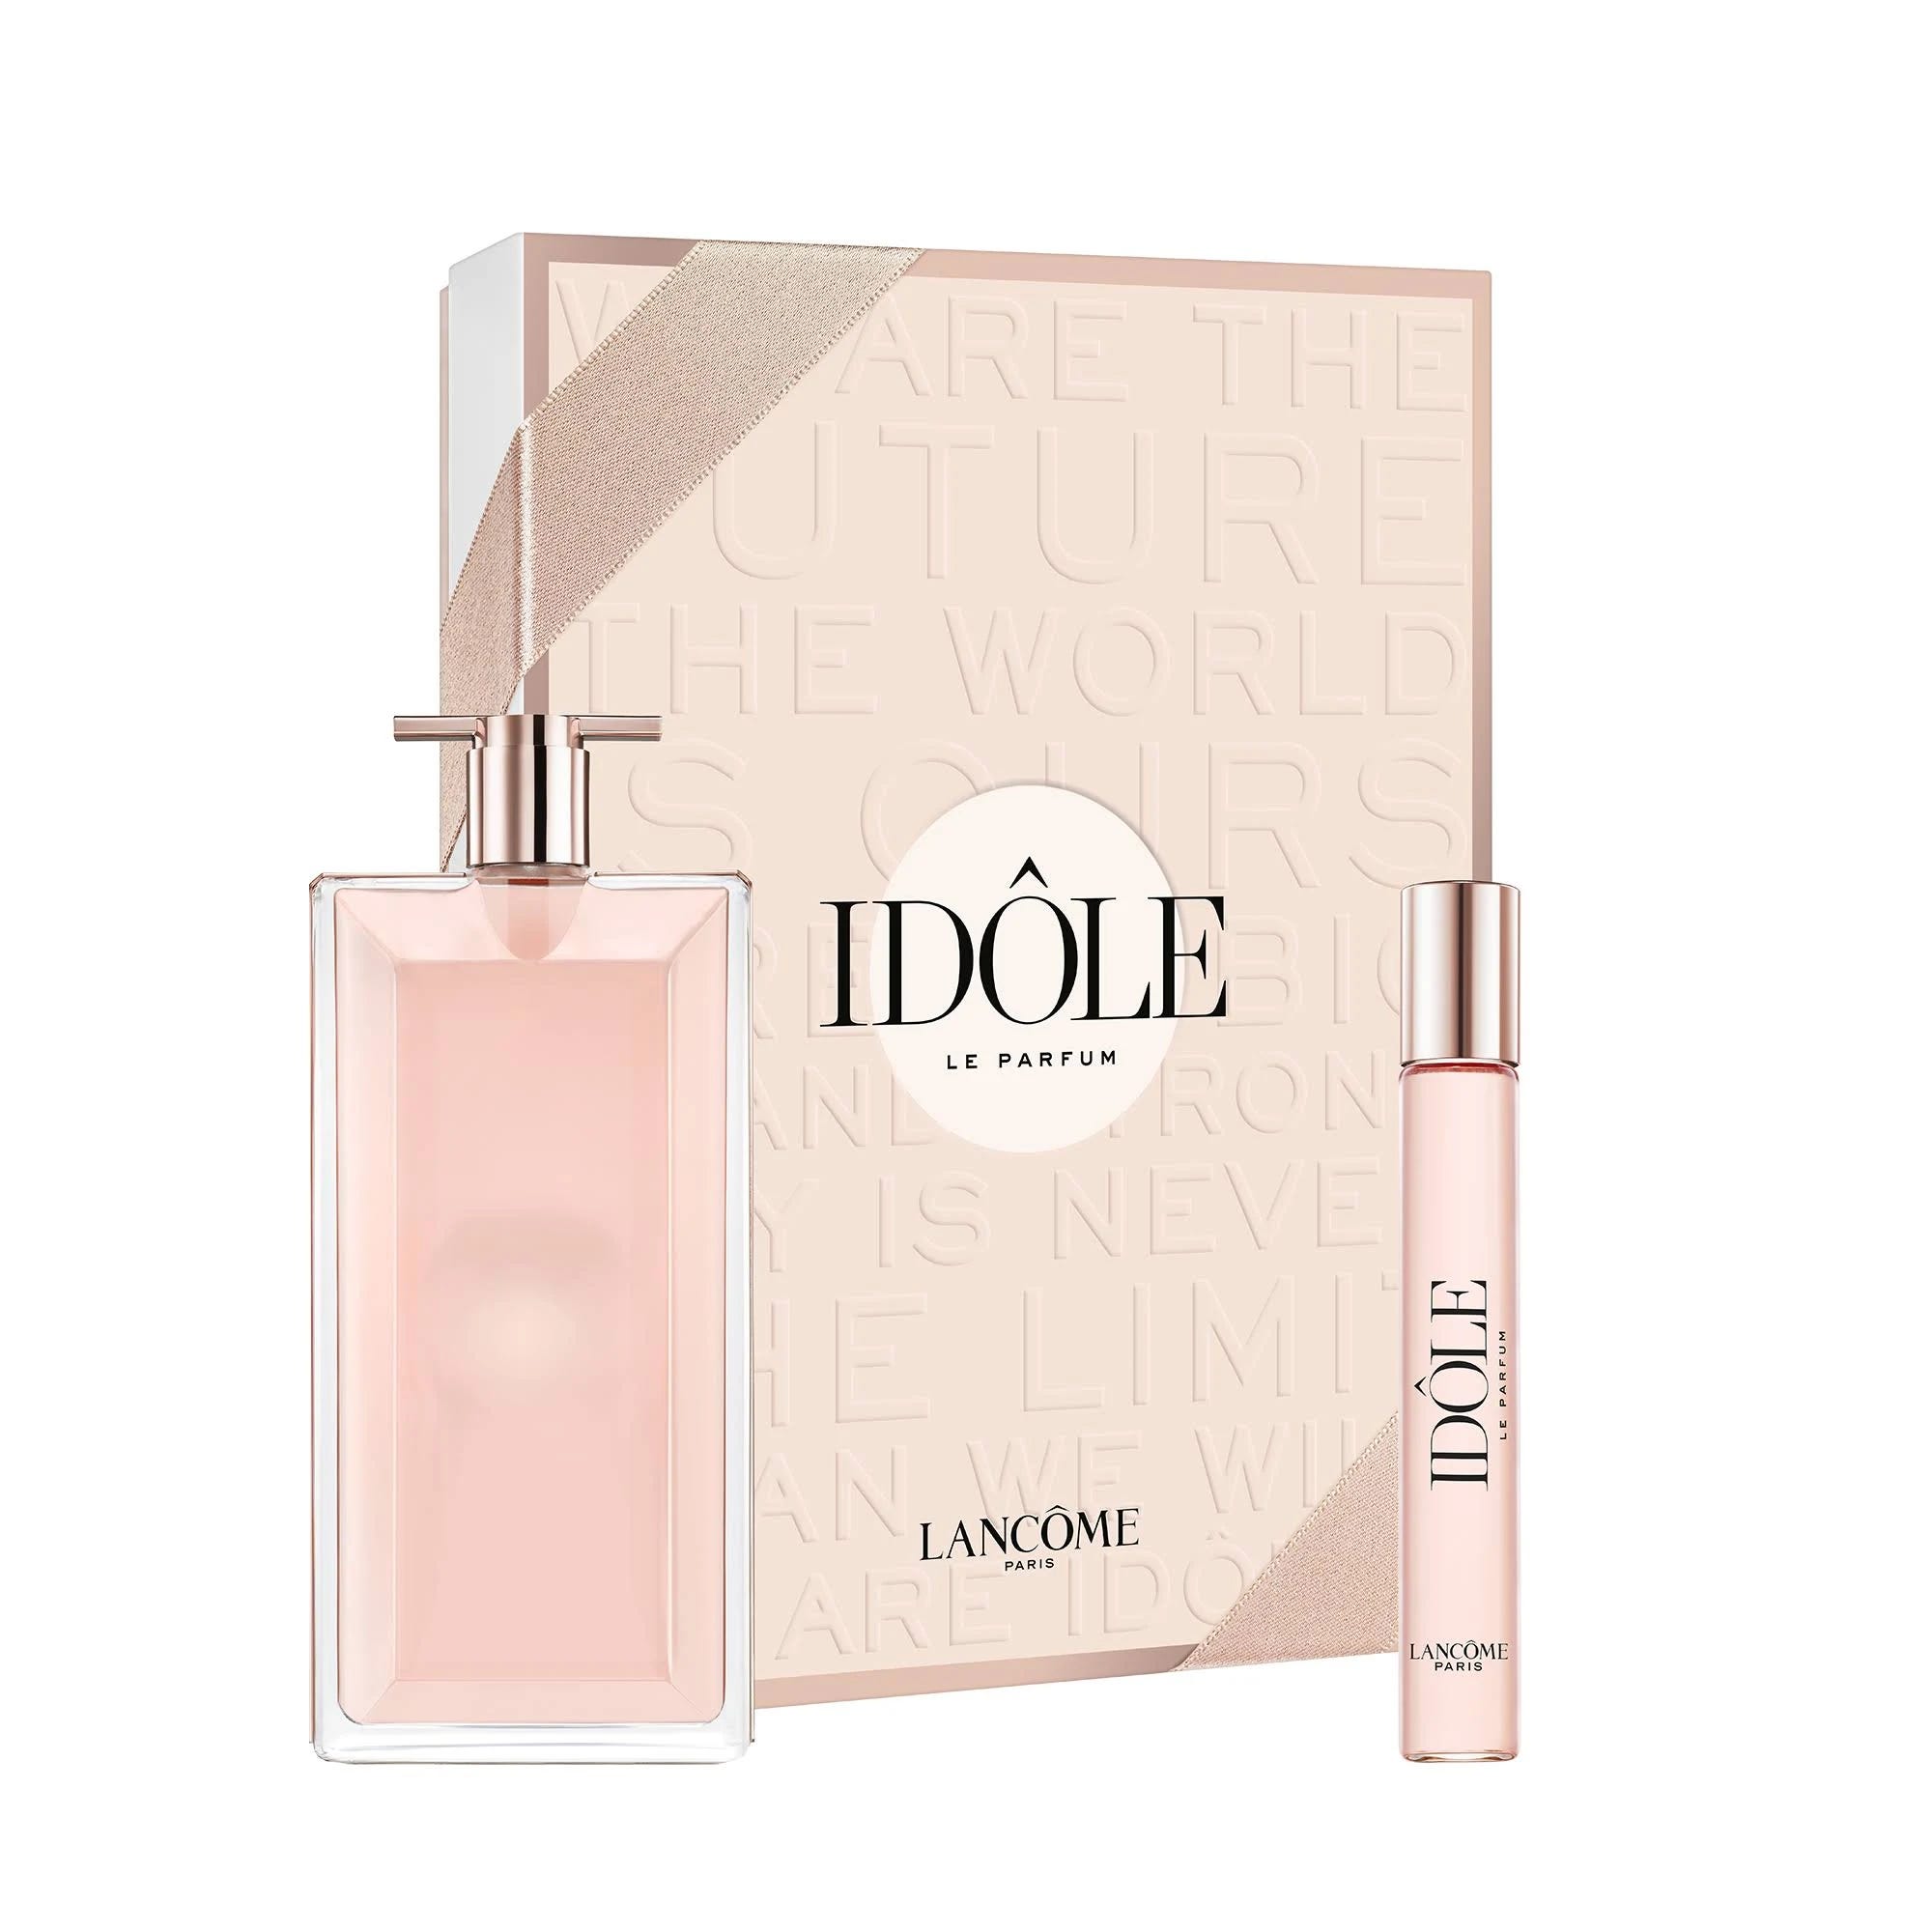 Lancome Idole Le Traveler Gift Set - Essential Perfume Collection | Image